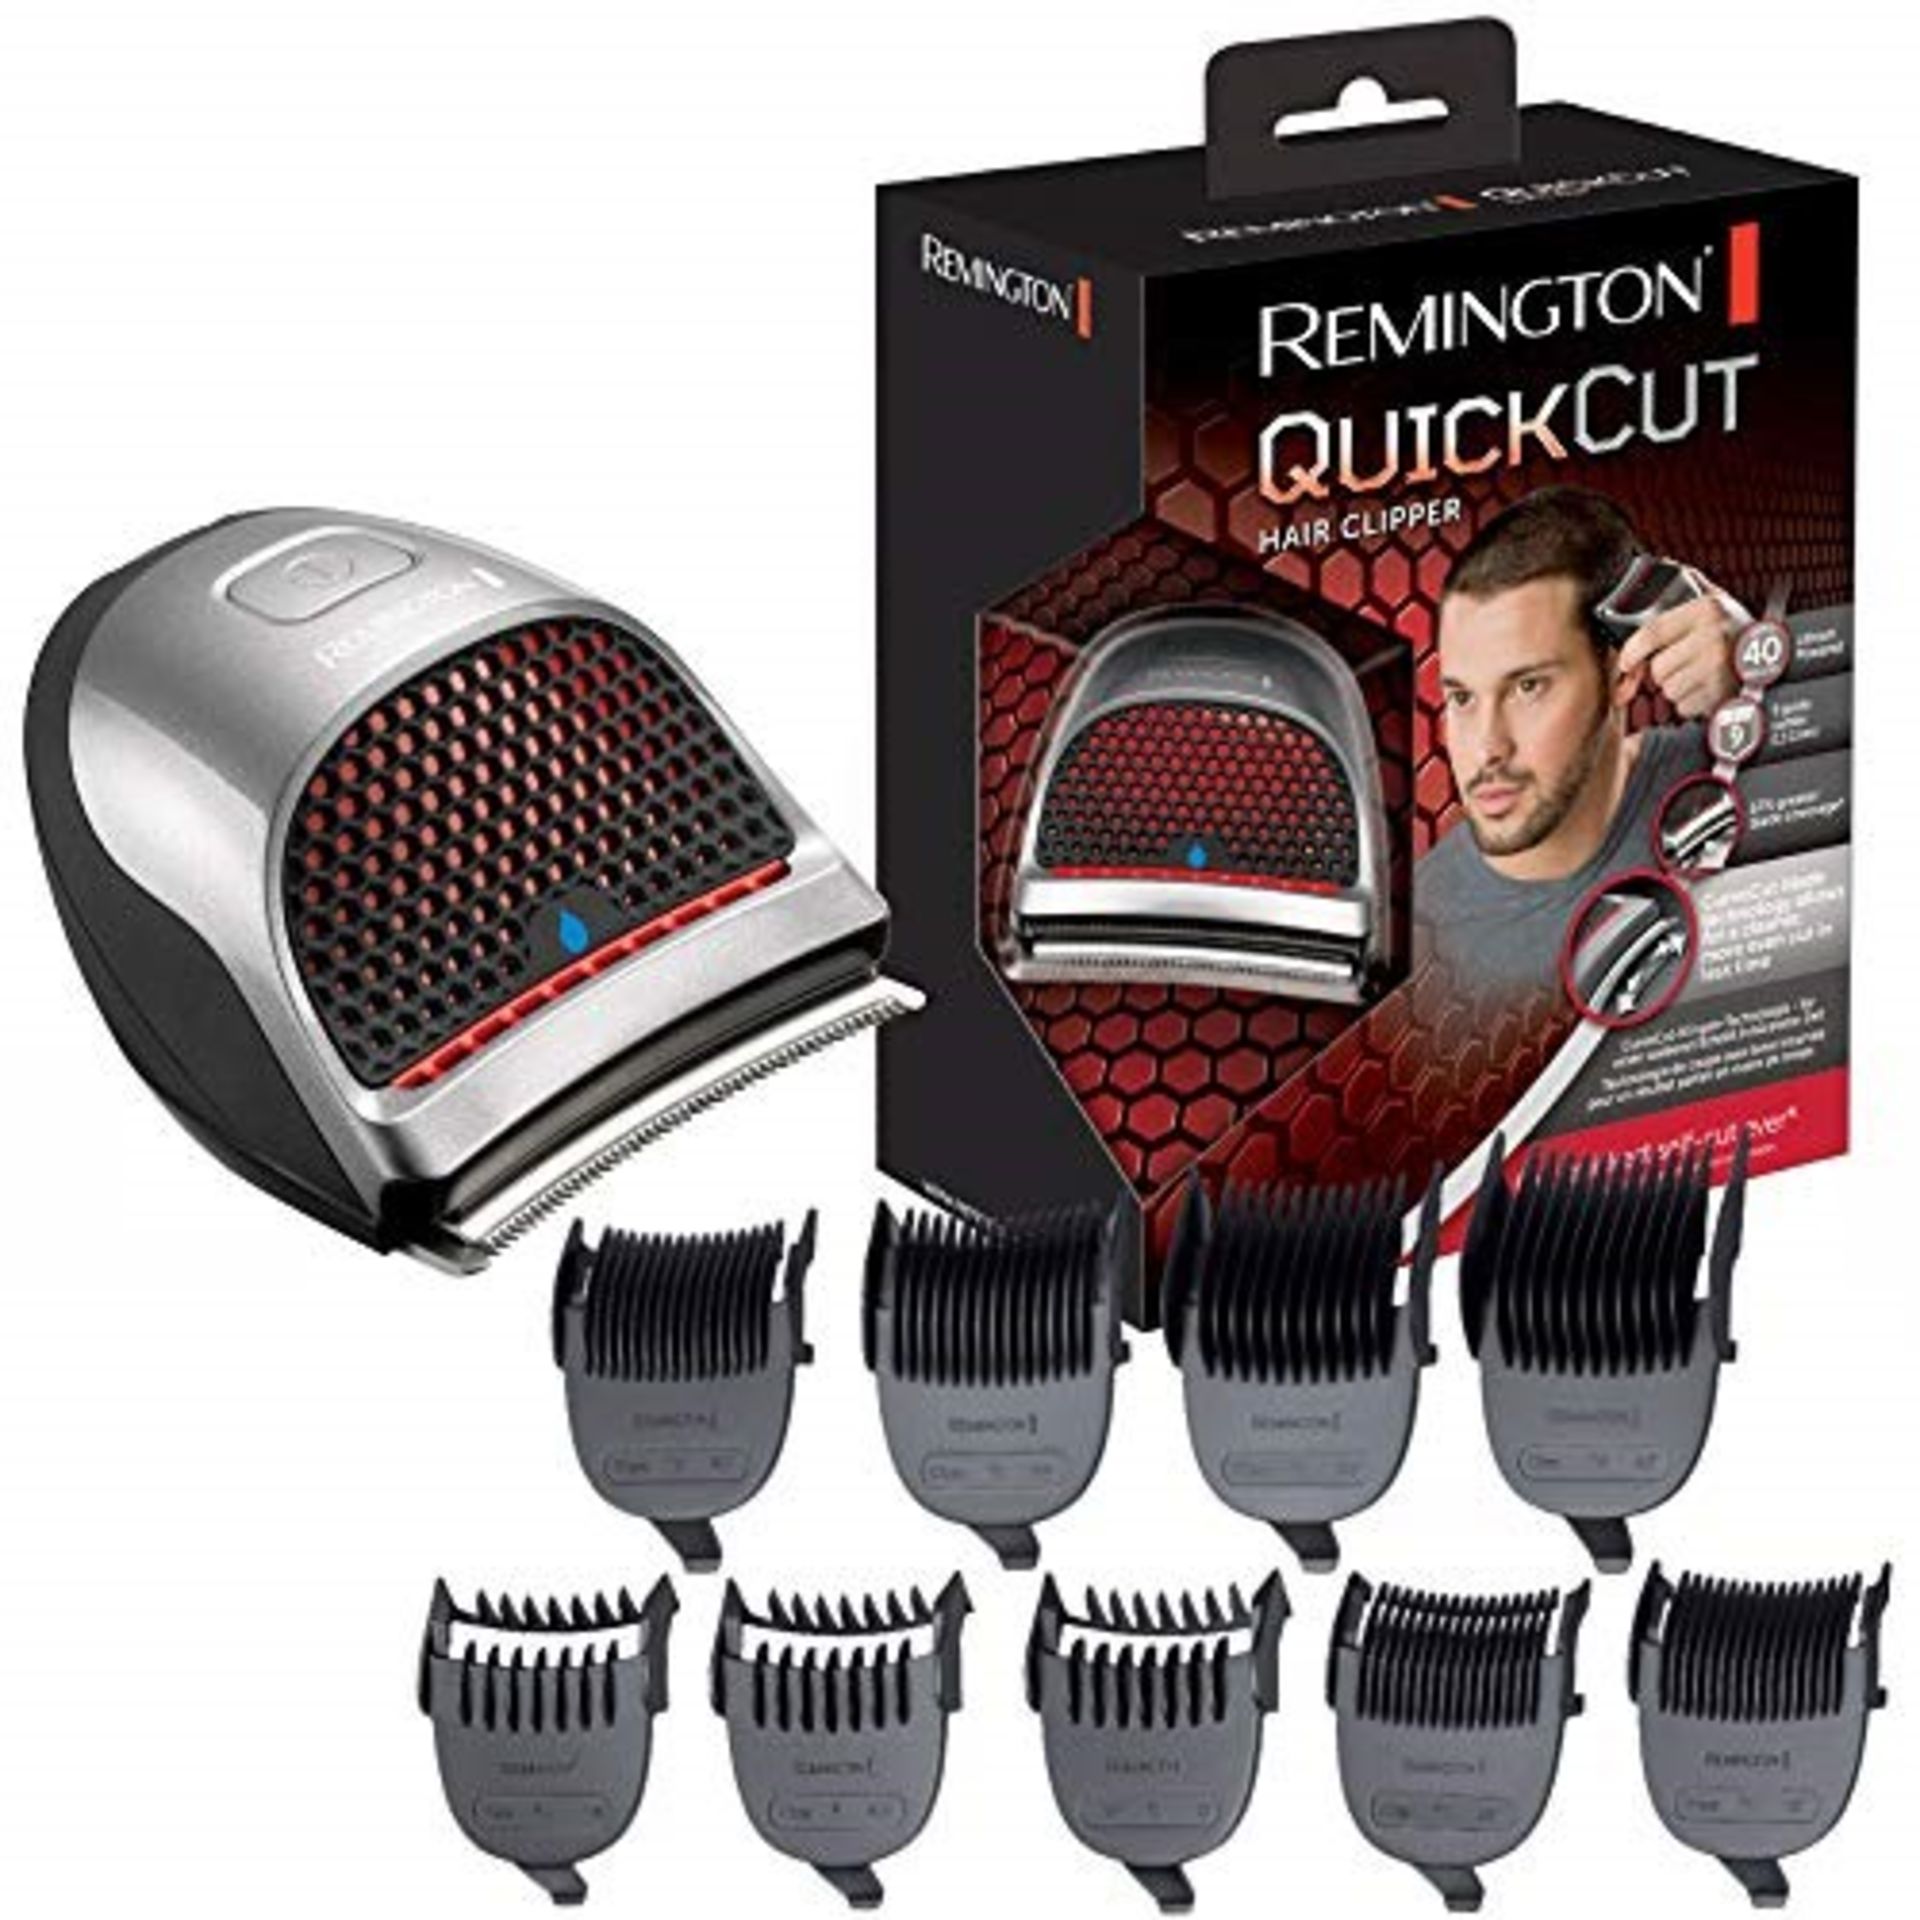 Remington Quick Cut Hair Clippers with 9 Comb Le